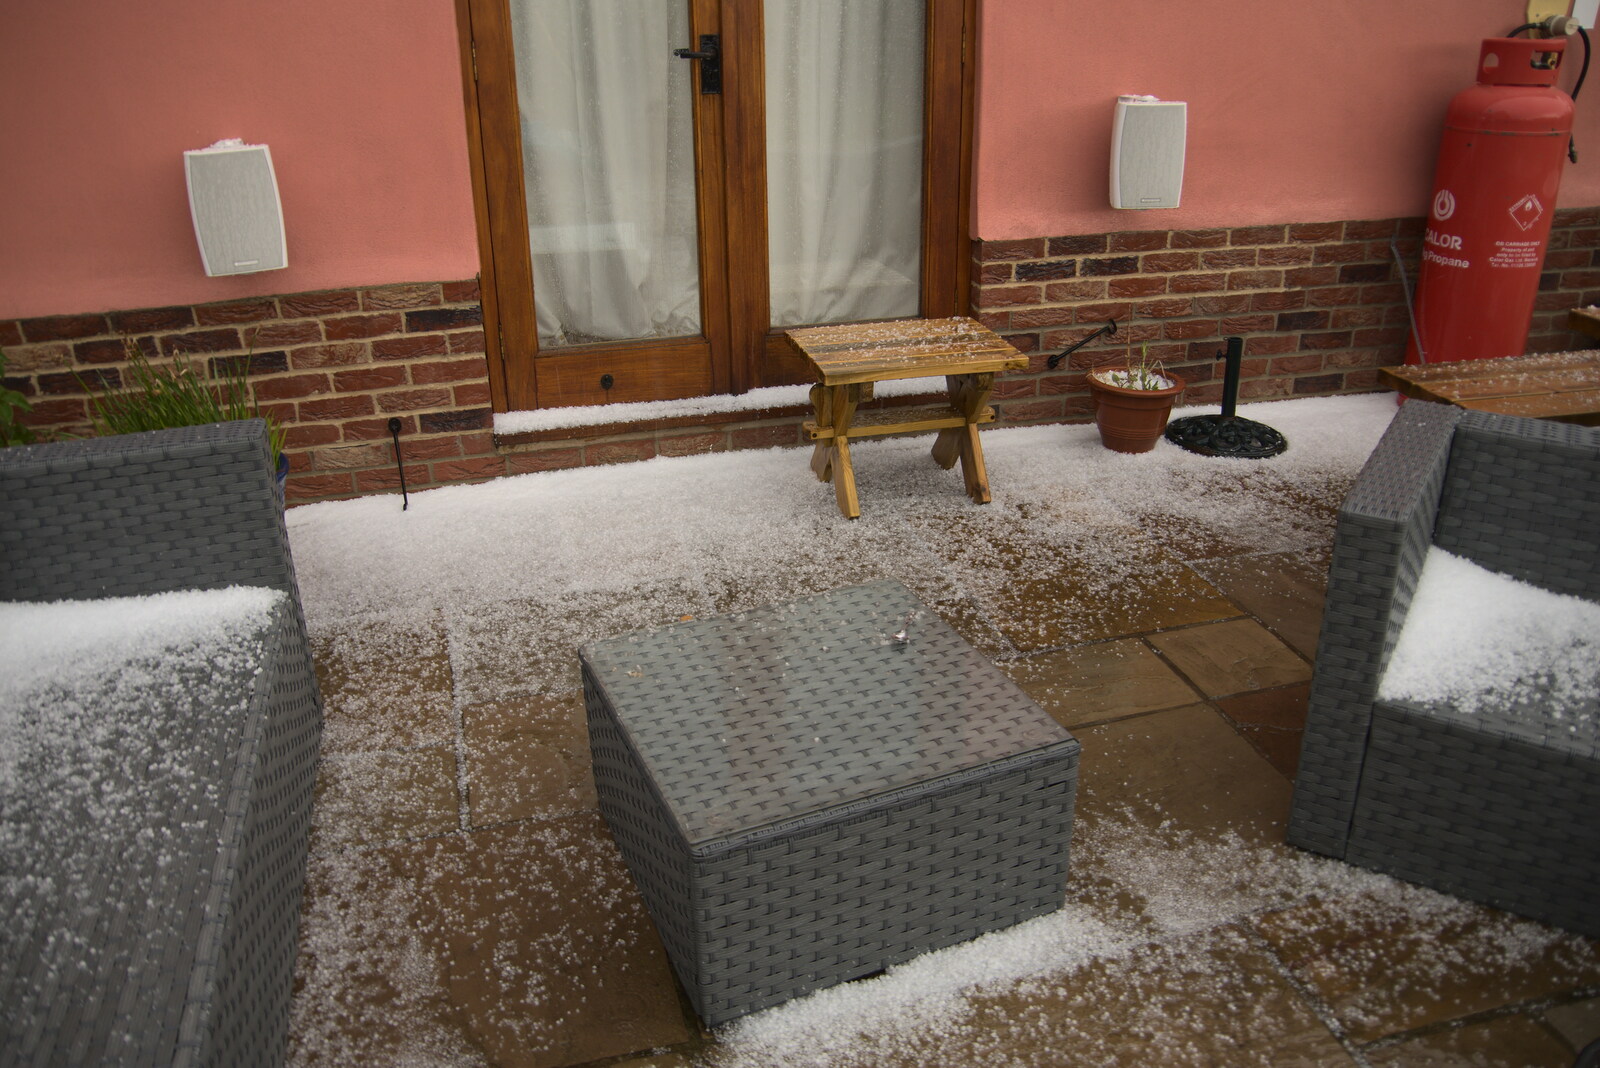 The hail drifts up on the garden furniture from A Day at the Beach with Sis, Southwold, Suffolk - 31st May 2021